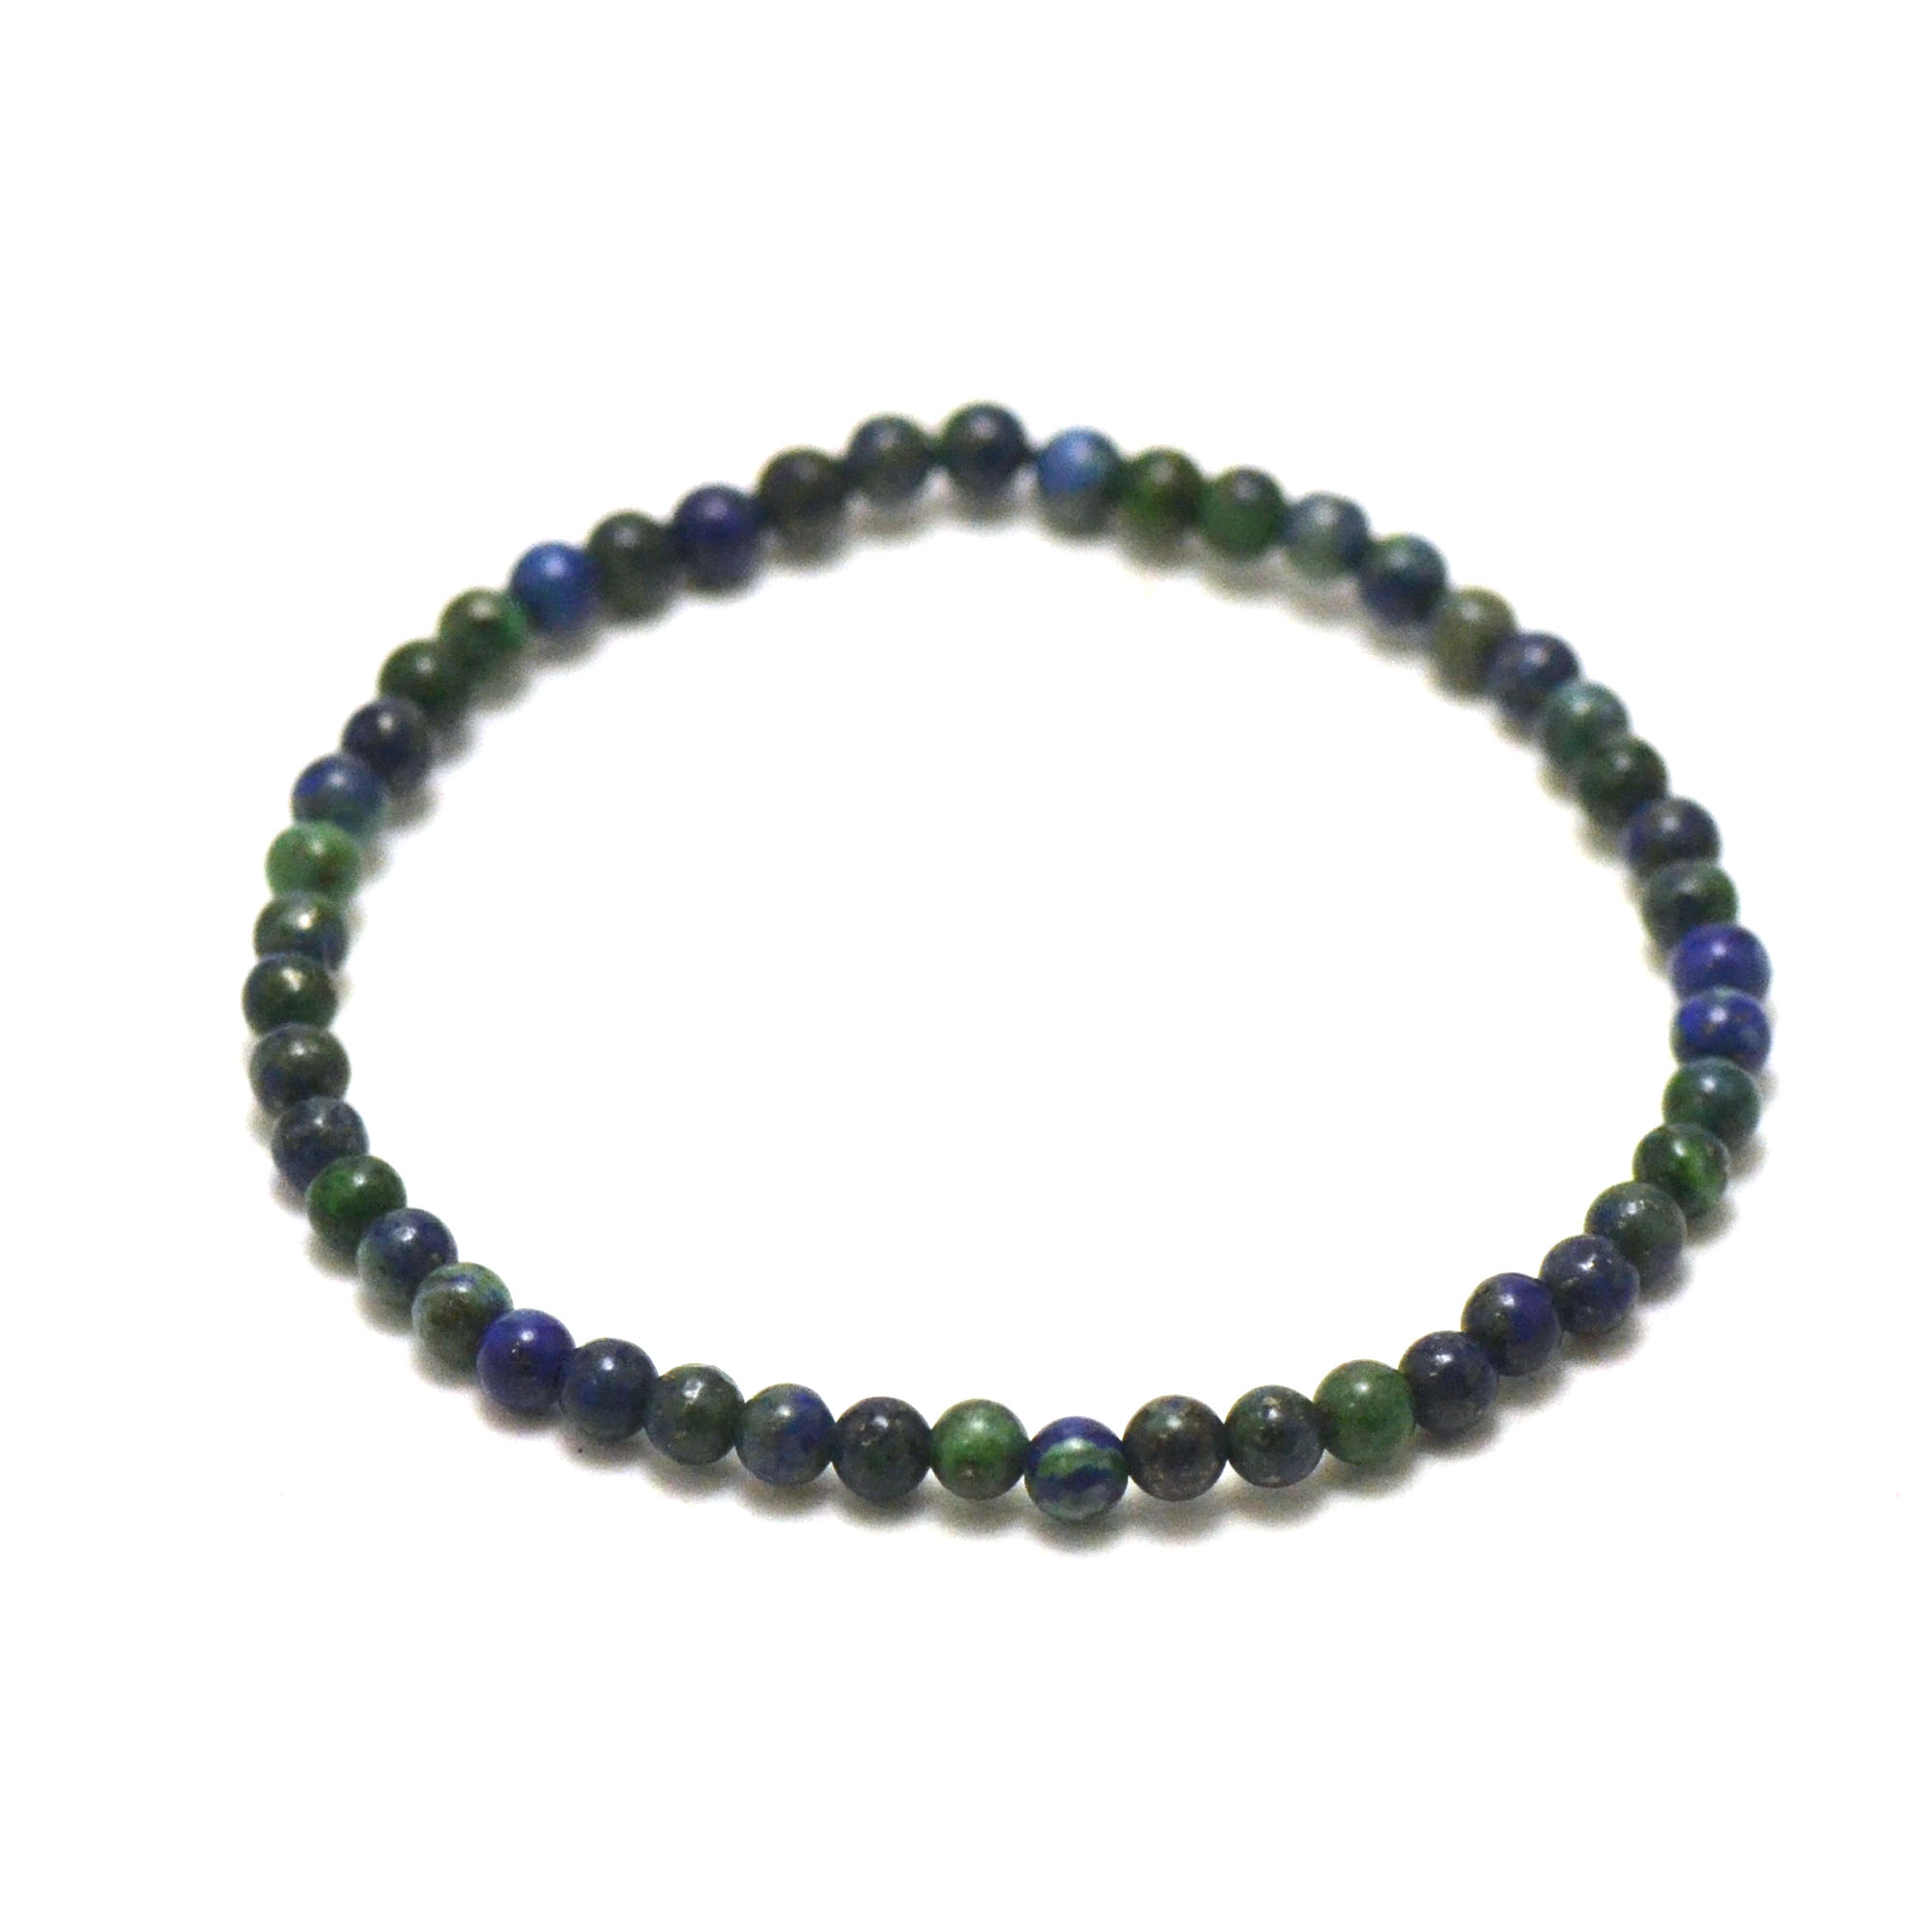 Buy ZUNBELLA Natural Azurite Bracelet 8 mm Crystal Stone Bracelet Round  Shape for Reiki Healing and Crystal Healing Stones (Color : Green & Blue)  at Amazon.in